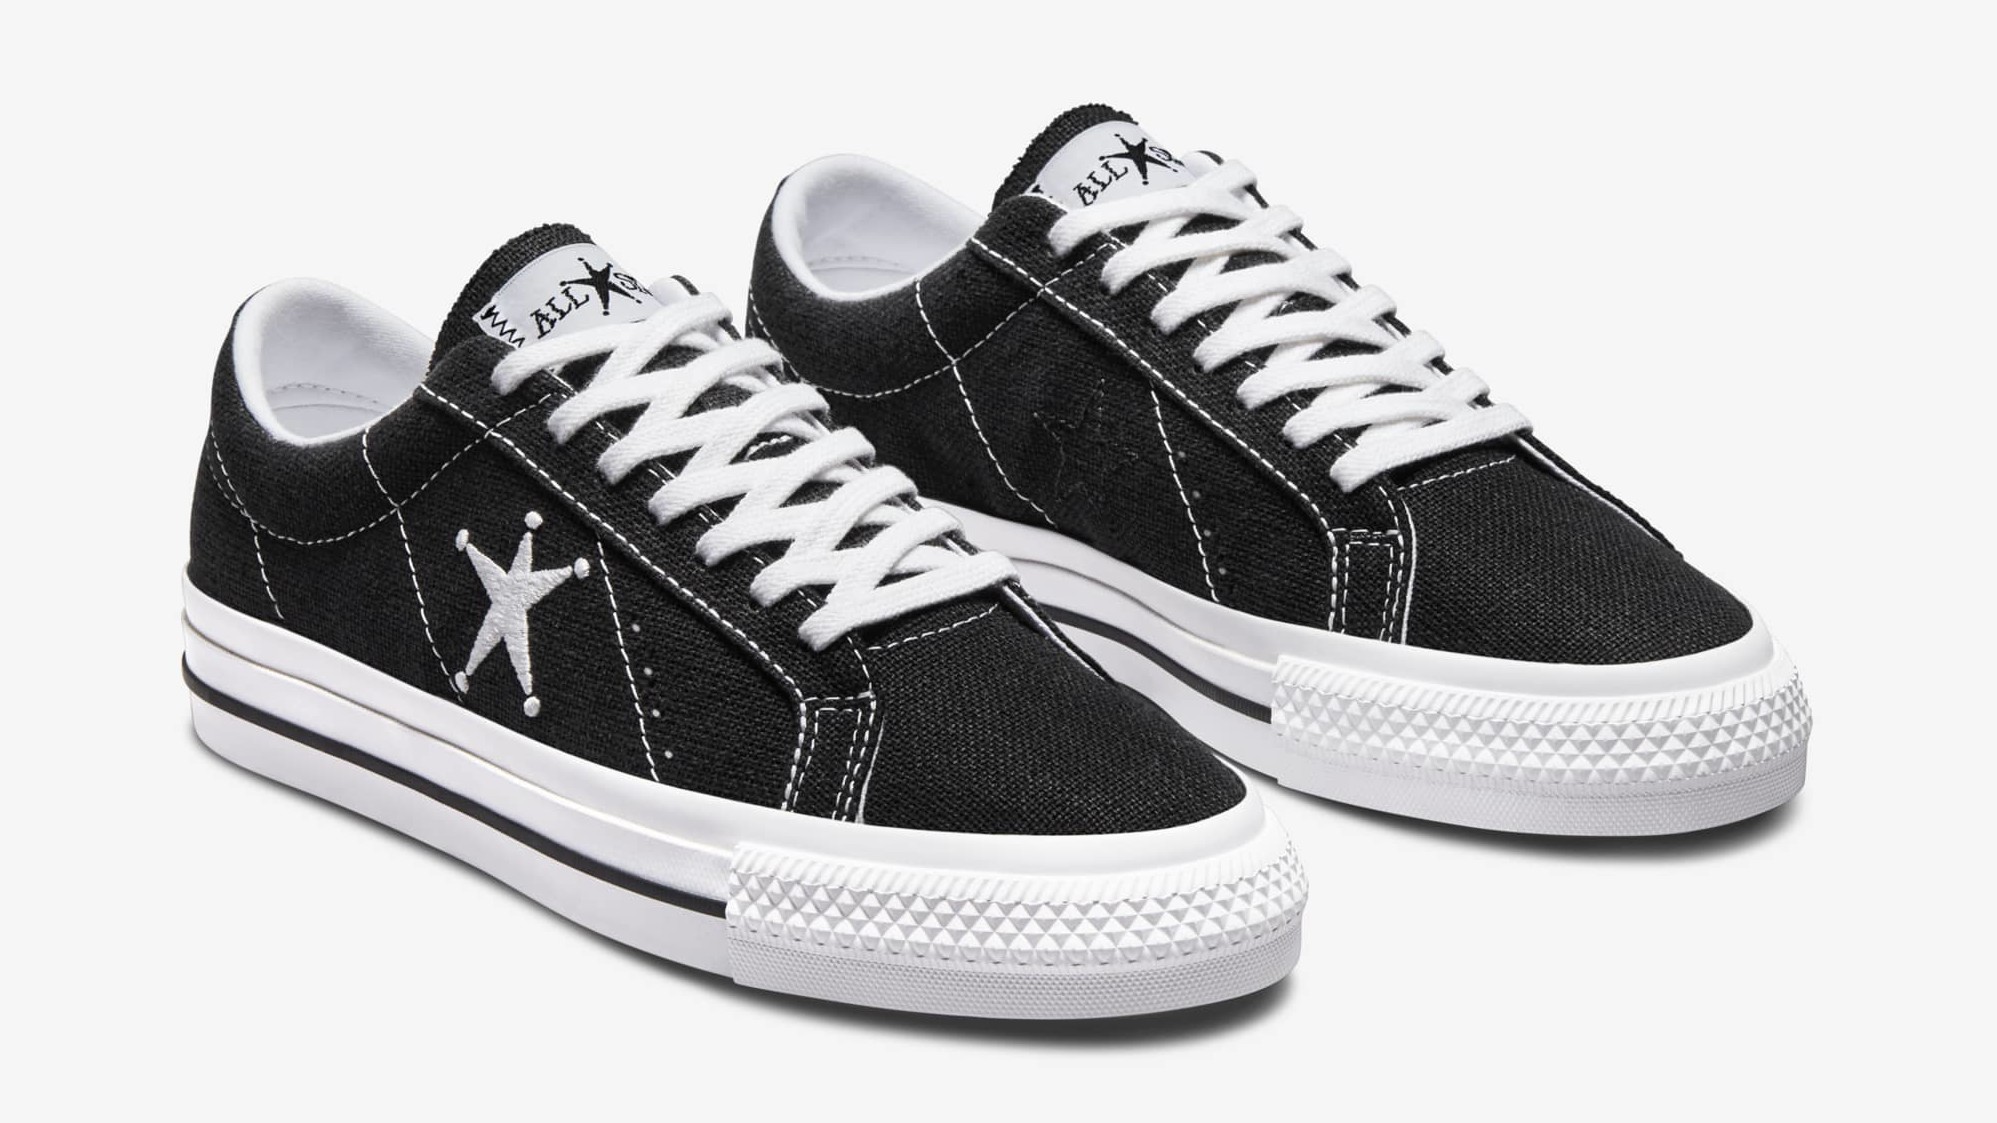 Stussy x Converse Chuck Taylor All-Star & One Star Collab | Sole 